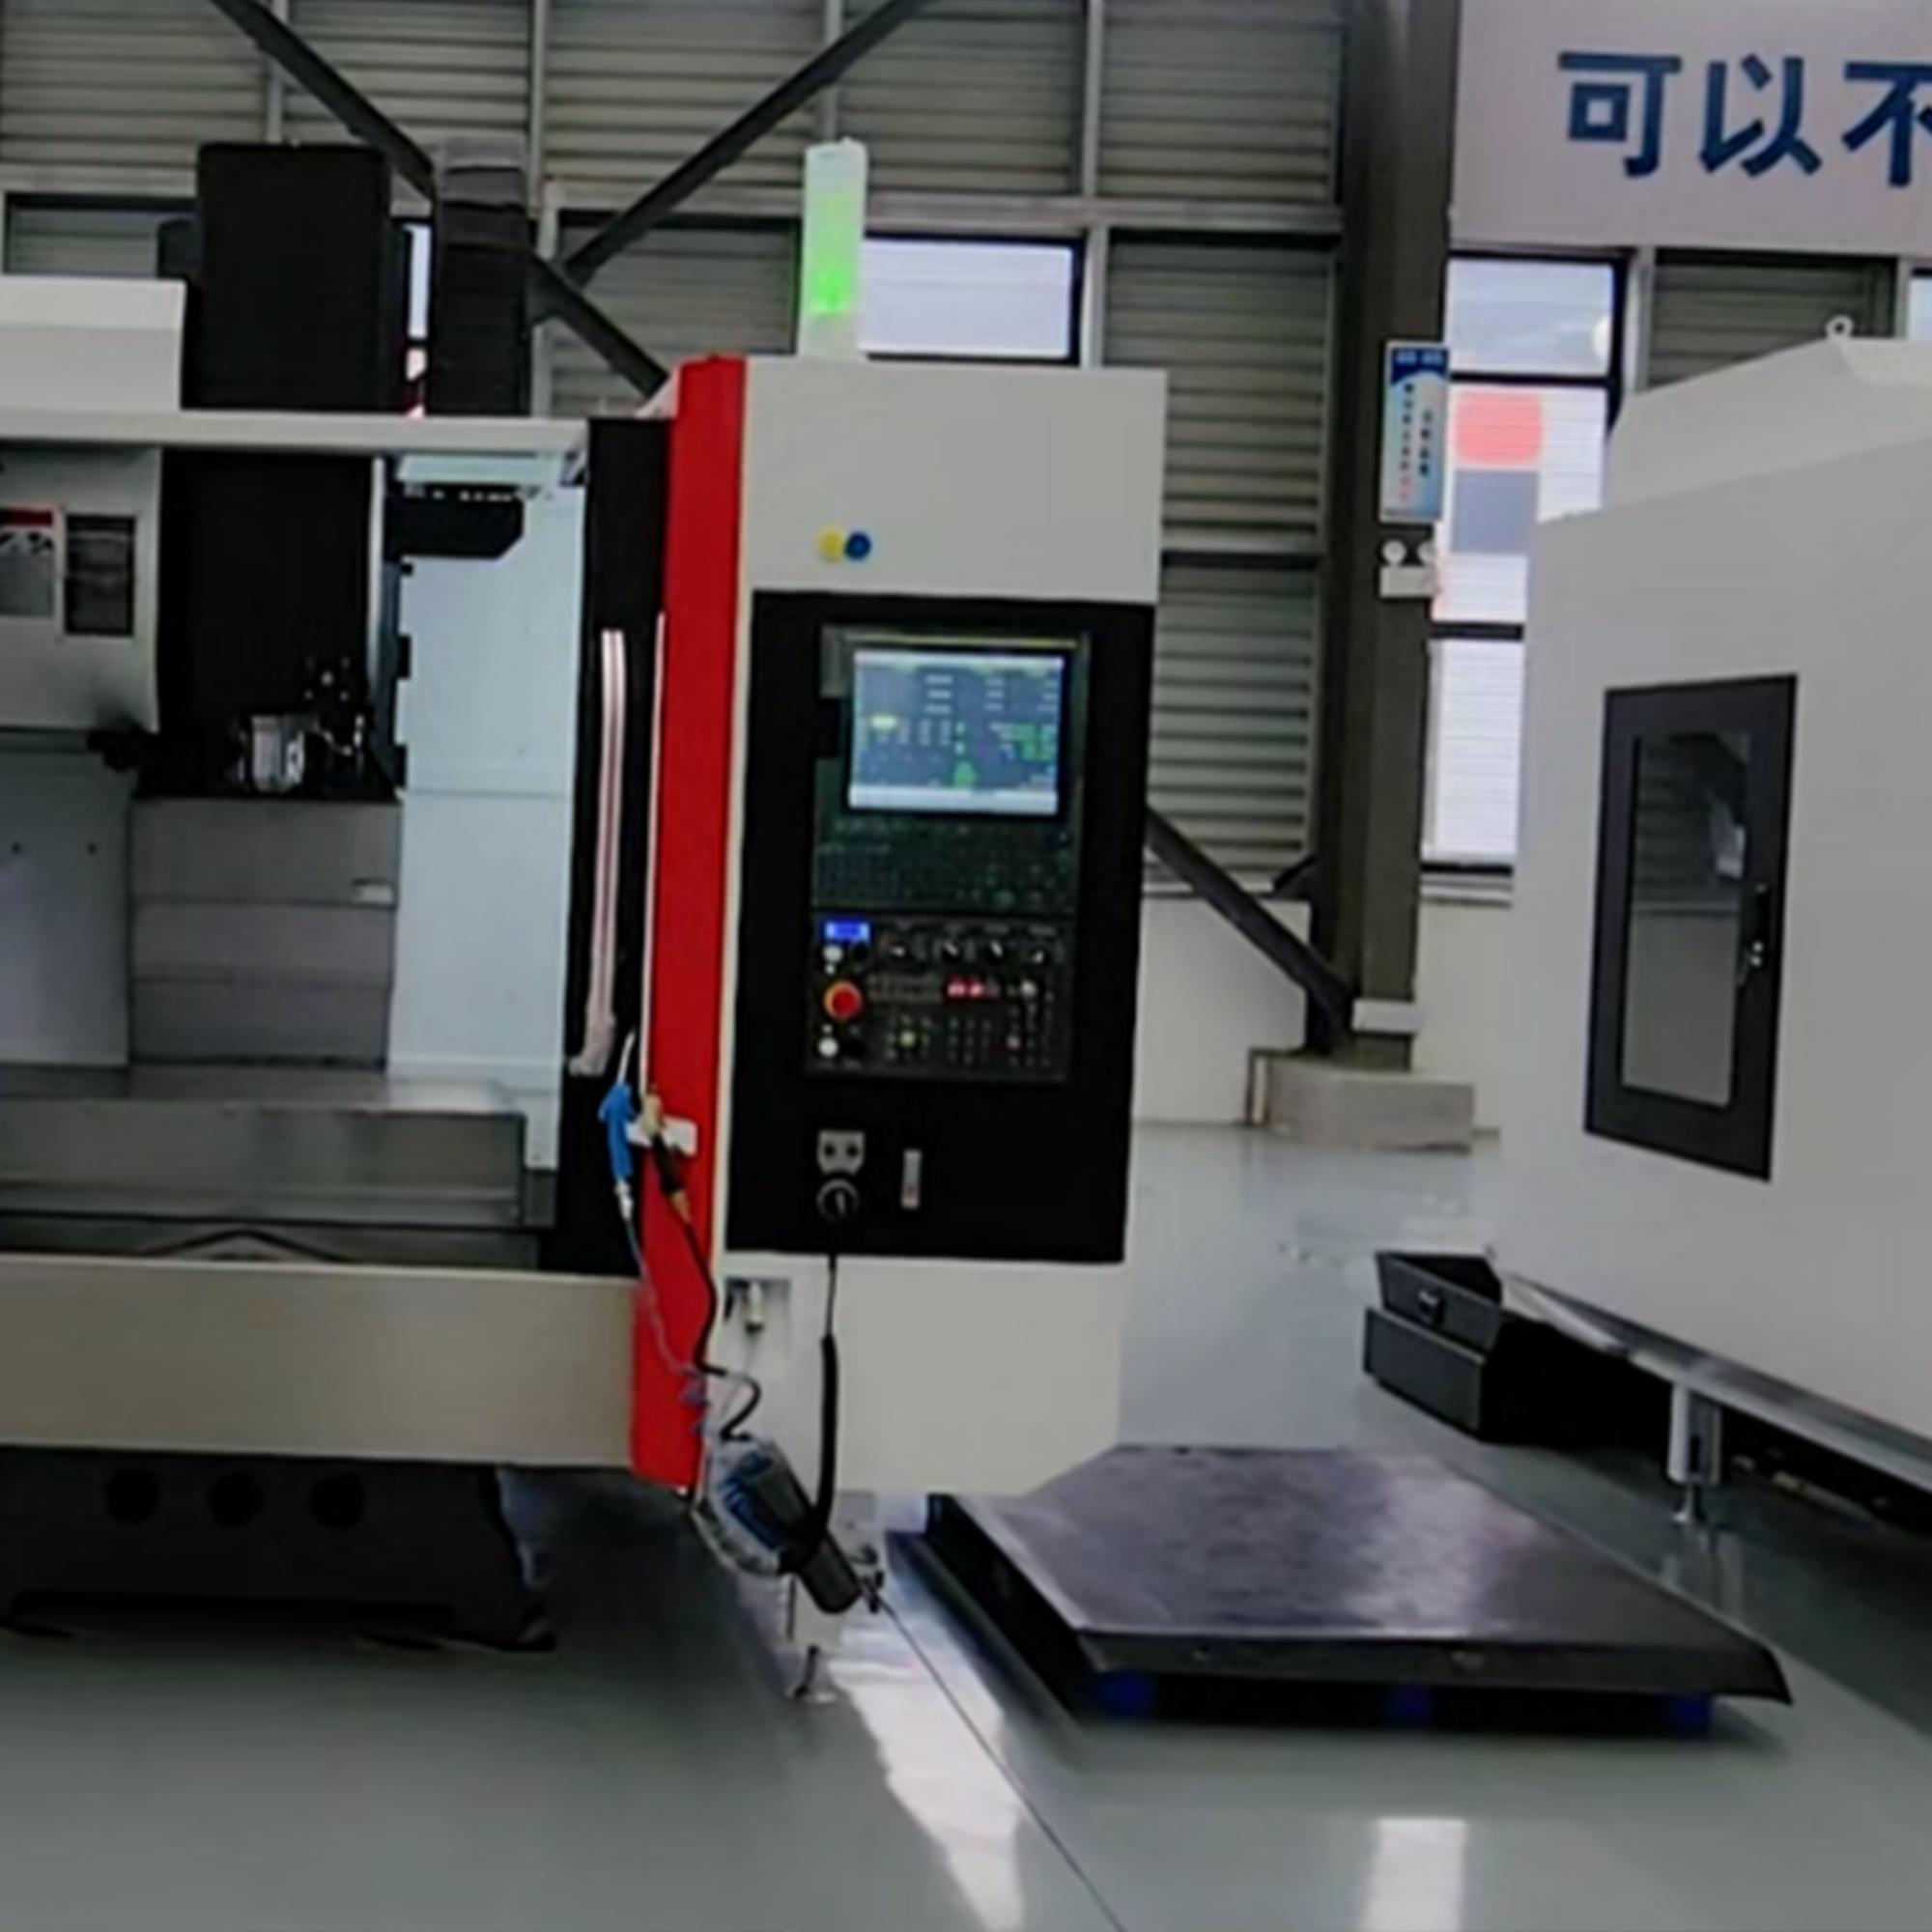 Do you know the requirements for moving machining centers?